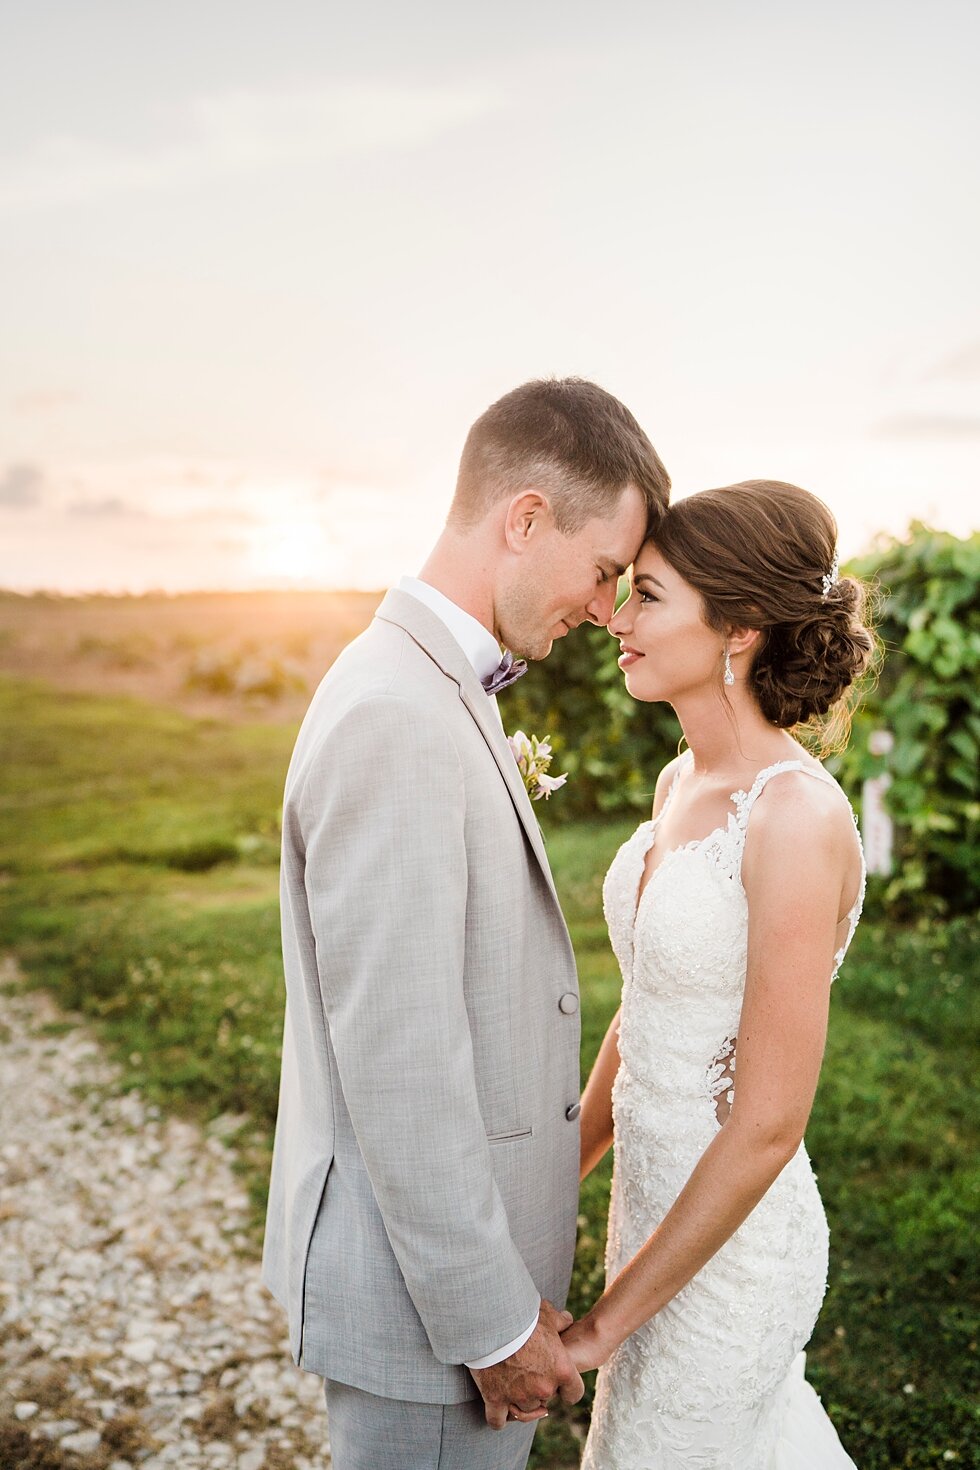  Bride and groom together touching foreheads and holding hands as the sun sets behind them in Louisville, Kentucky. wedding ceremony details stunning photography married midwest louisville kentucky #weddingphoto #love #justmarried #midwestphotographe